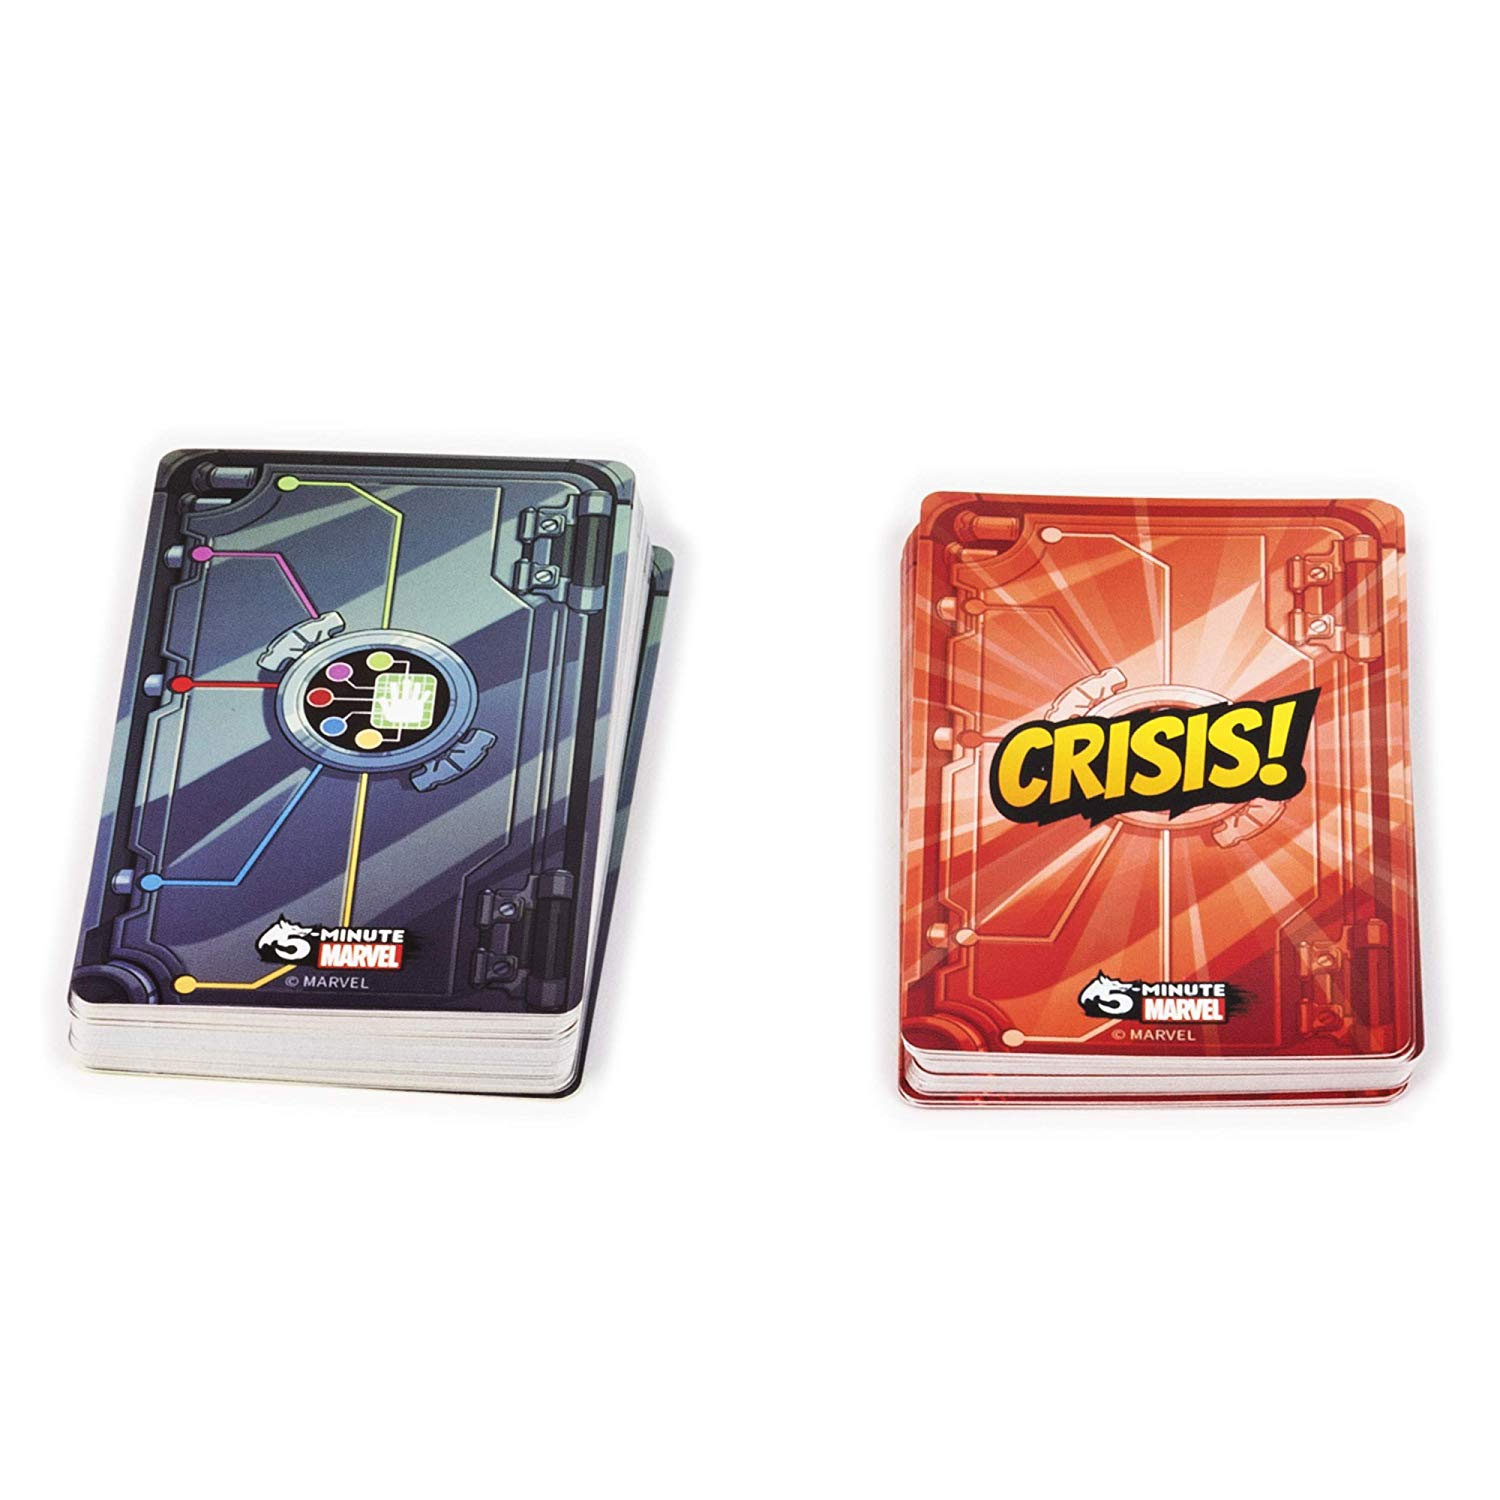 5Minute Marvel FastPaced Cooperative Card Game